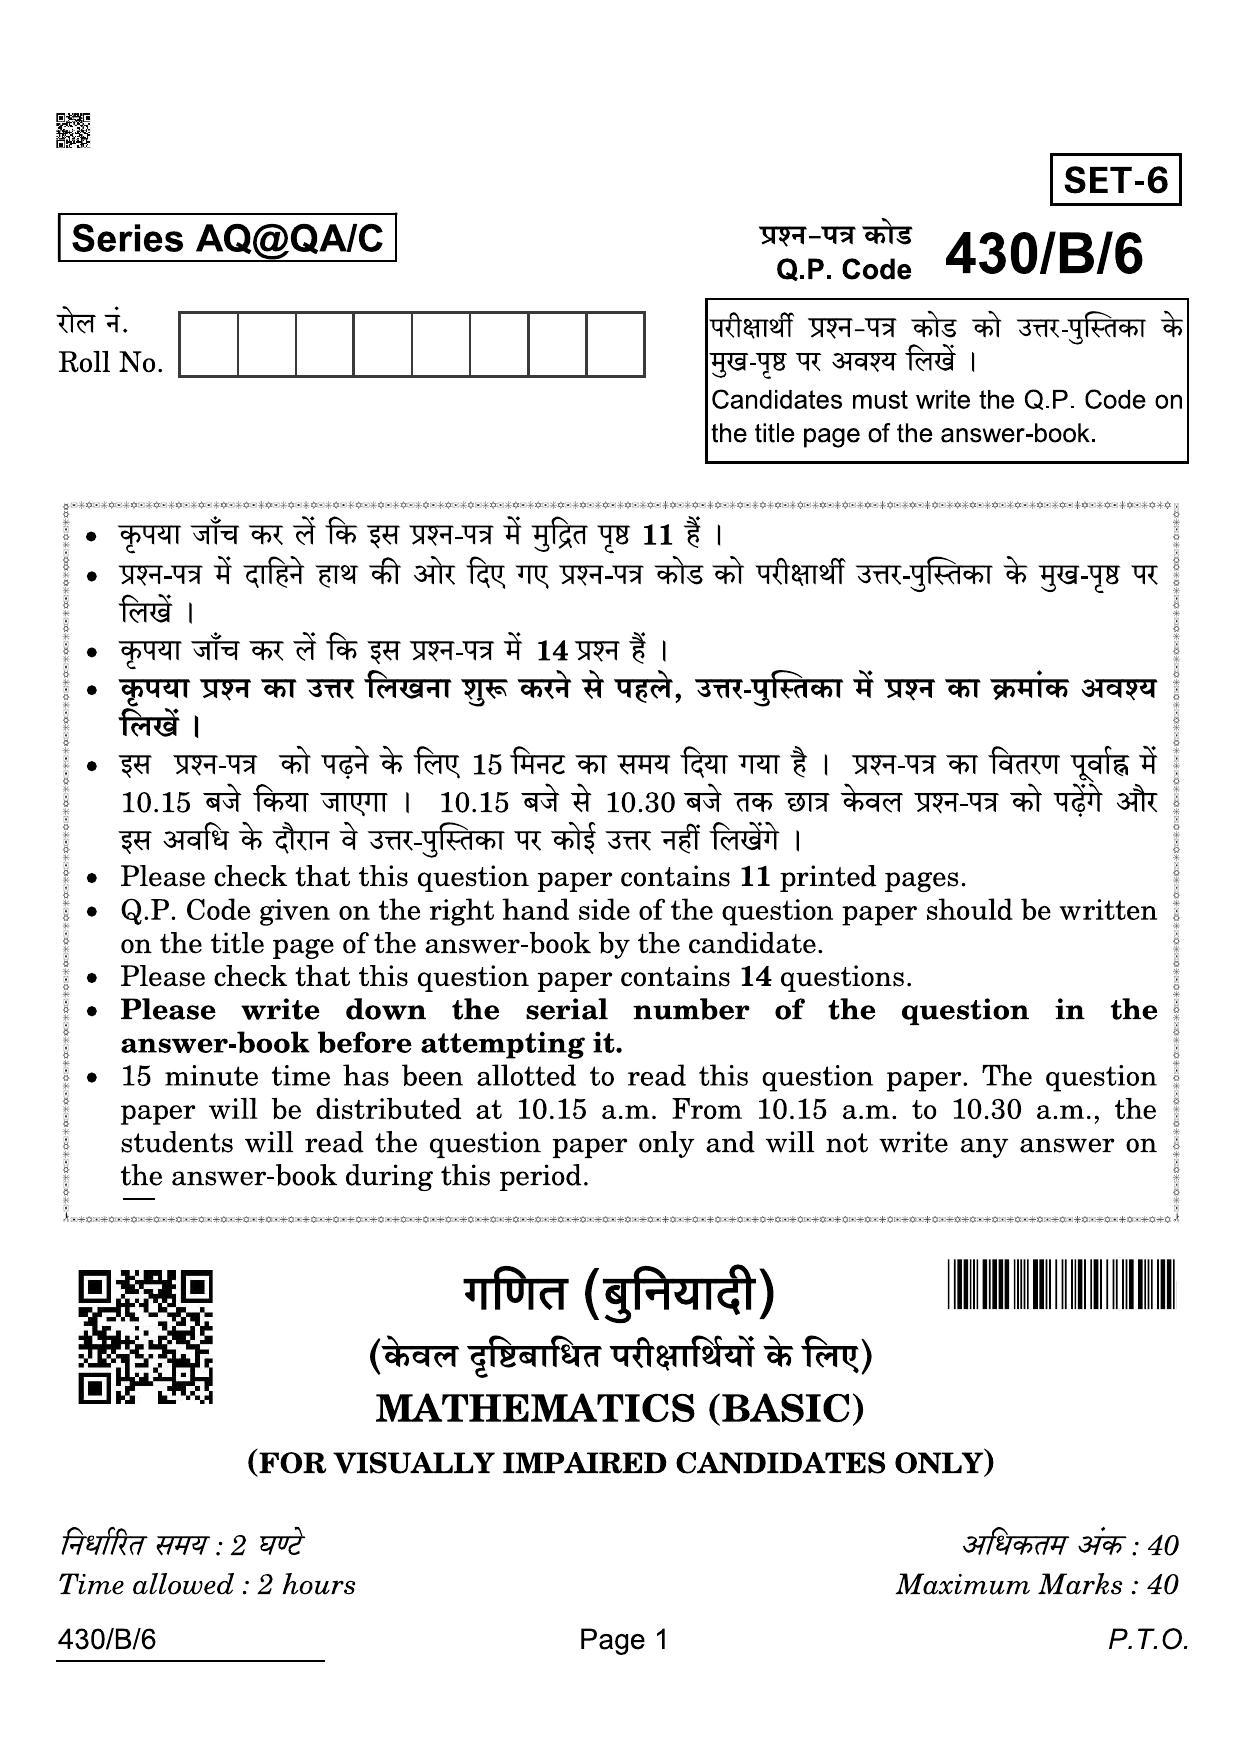 CBSE Class 10 430-B-6 Maths Basic Blind 2022 Compartment Question Paper - Page 1